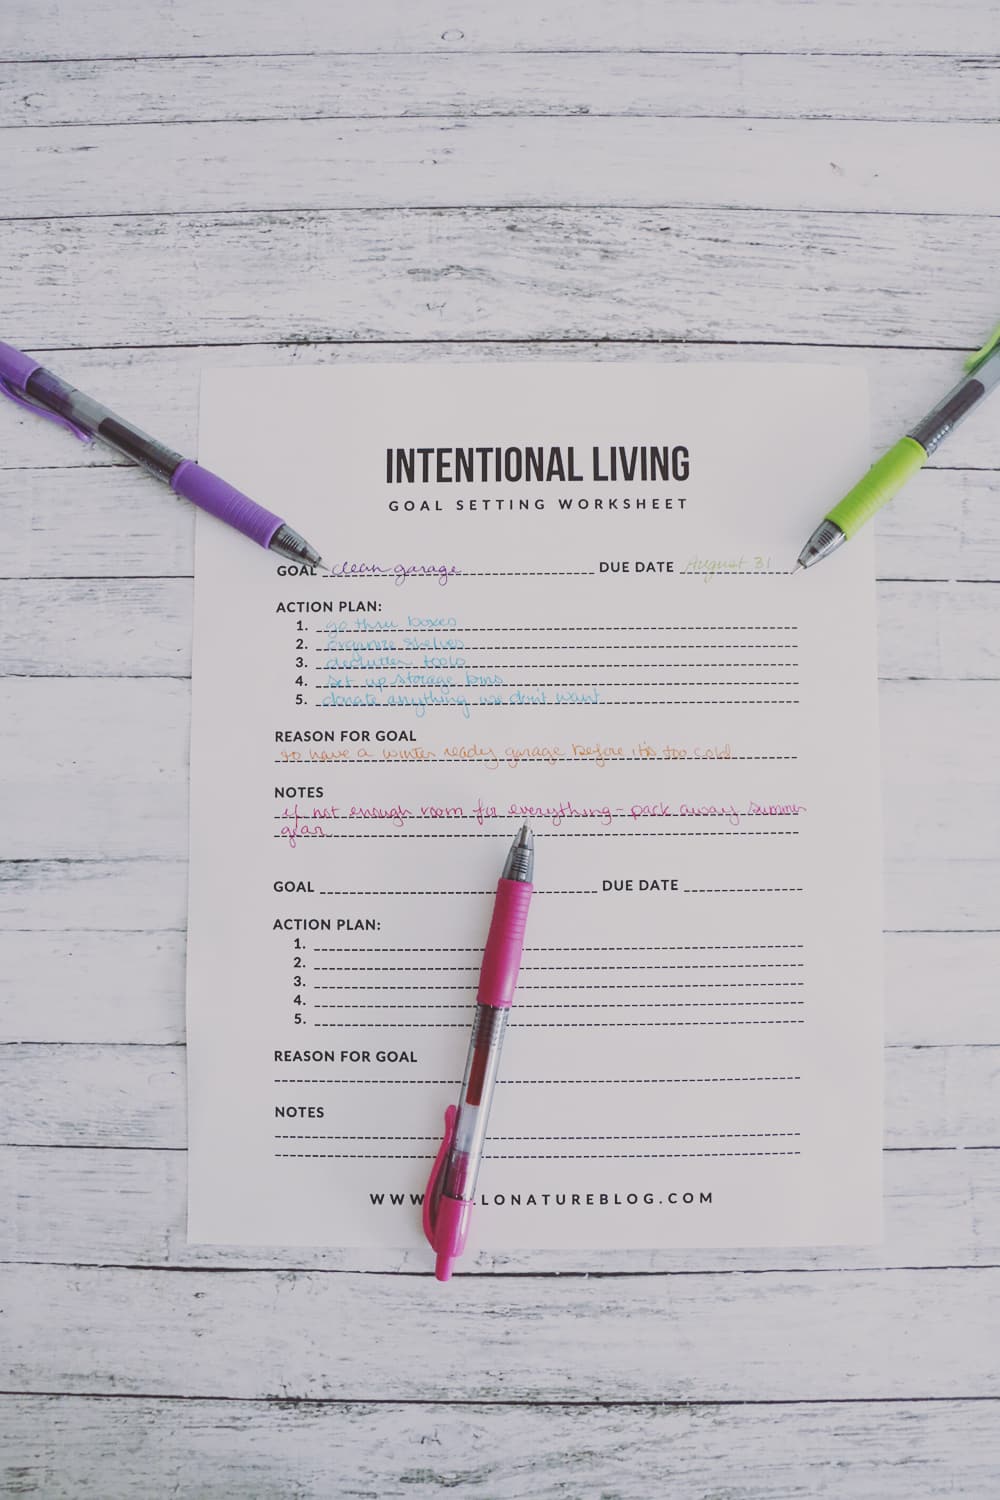 Living intentionally doesn't have to be hard. This goal setting worksheet will help you achieve your mindful goals in no time!